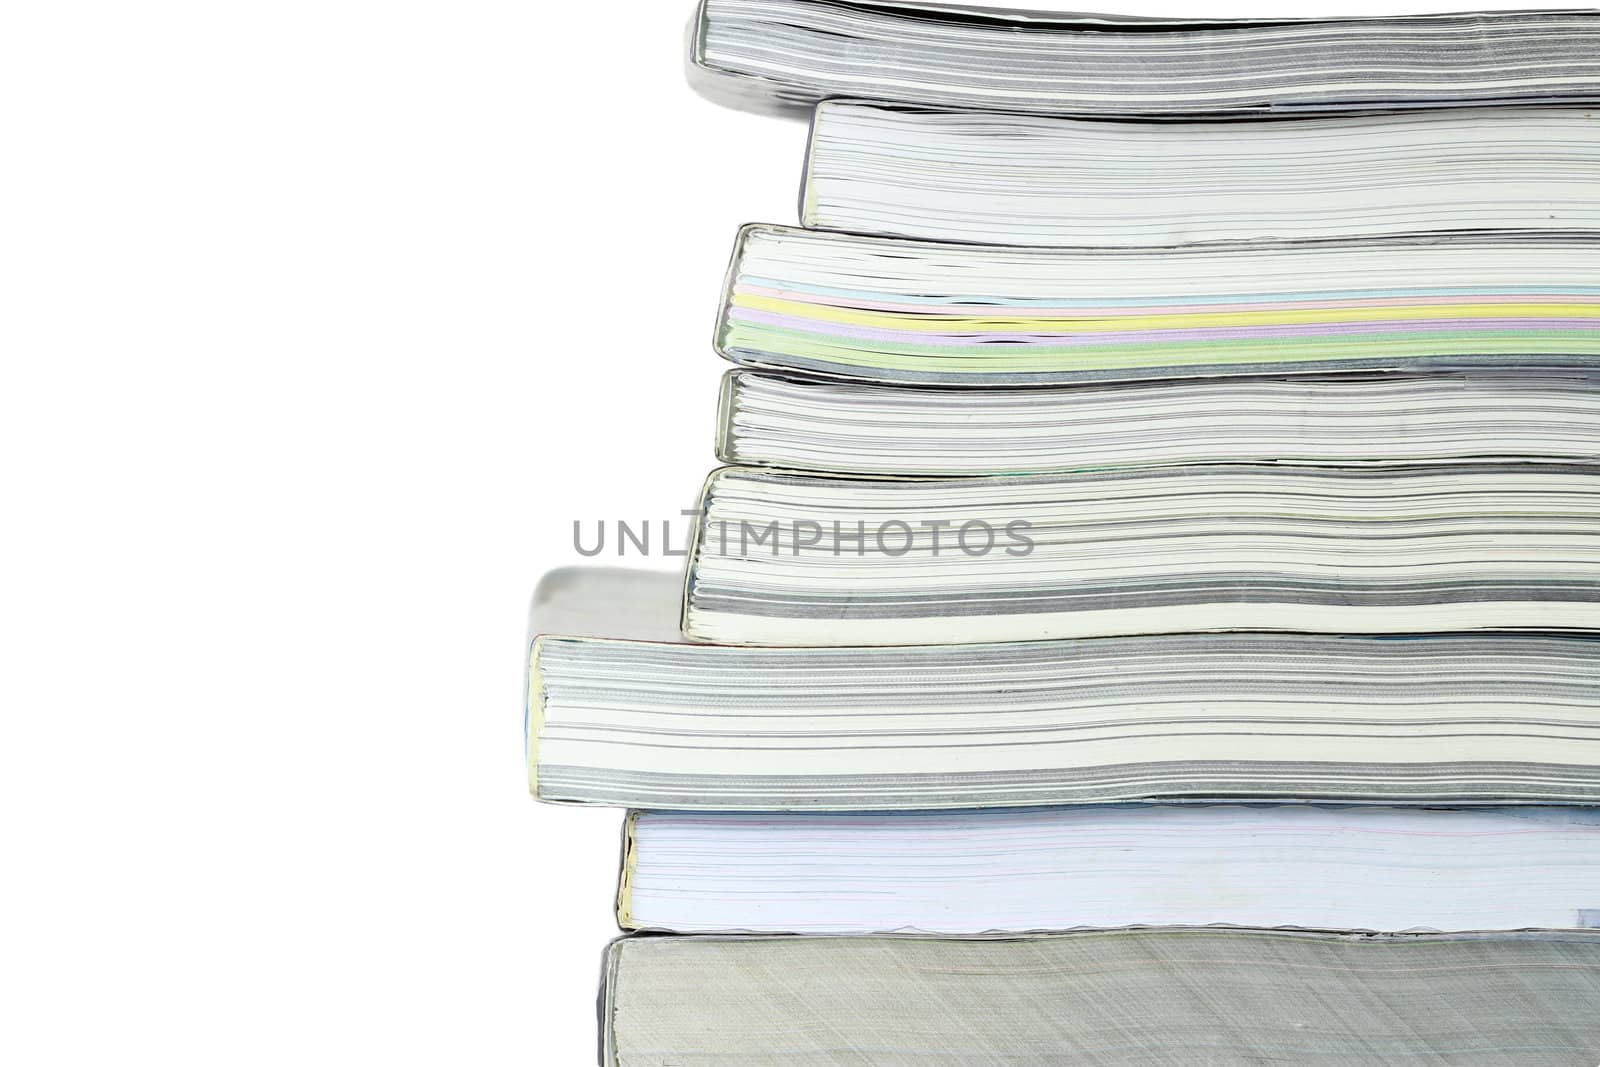 Stack of books on white background, partial view. by bajita111122